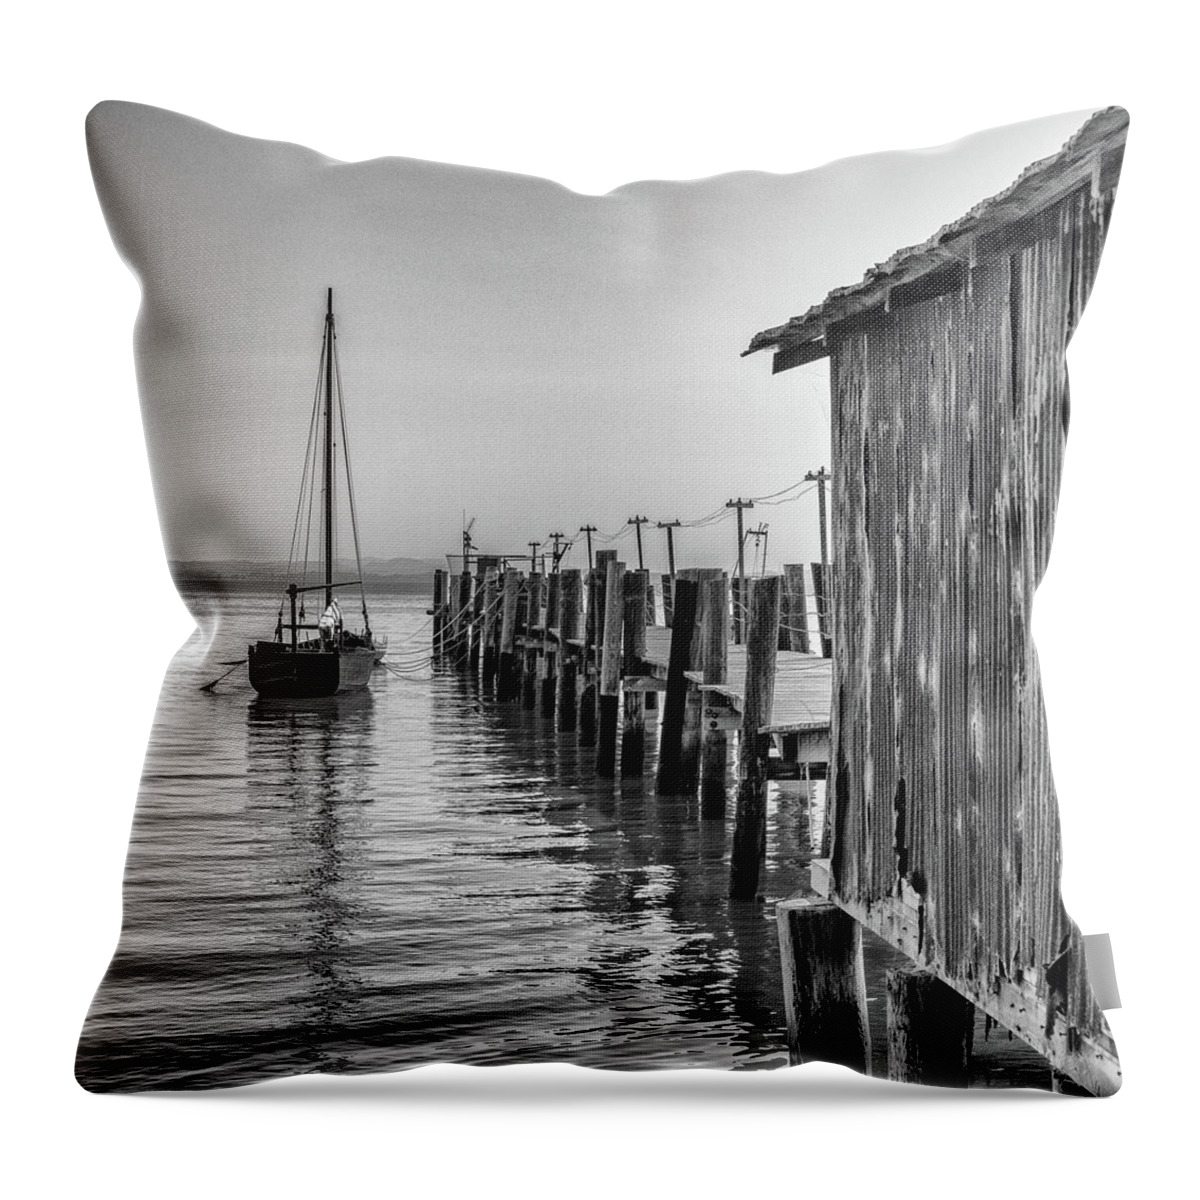 China Camp State Park Throw Pillow featuring the photograph China Camp by Carol Thomas by California Coastal Commission